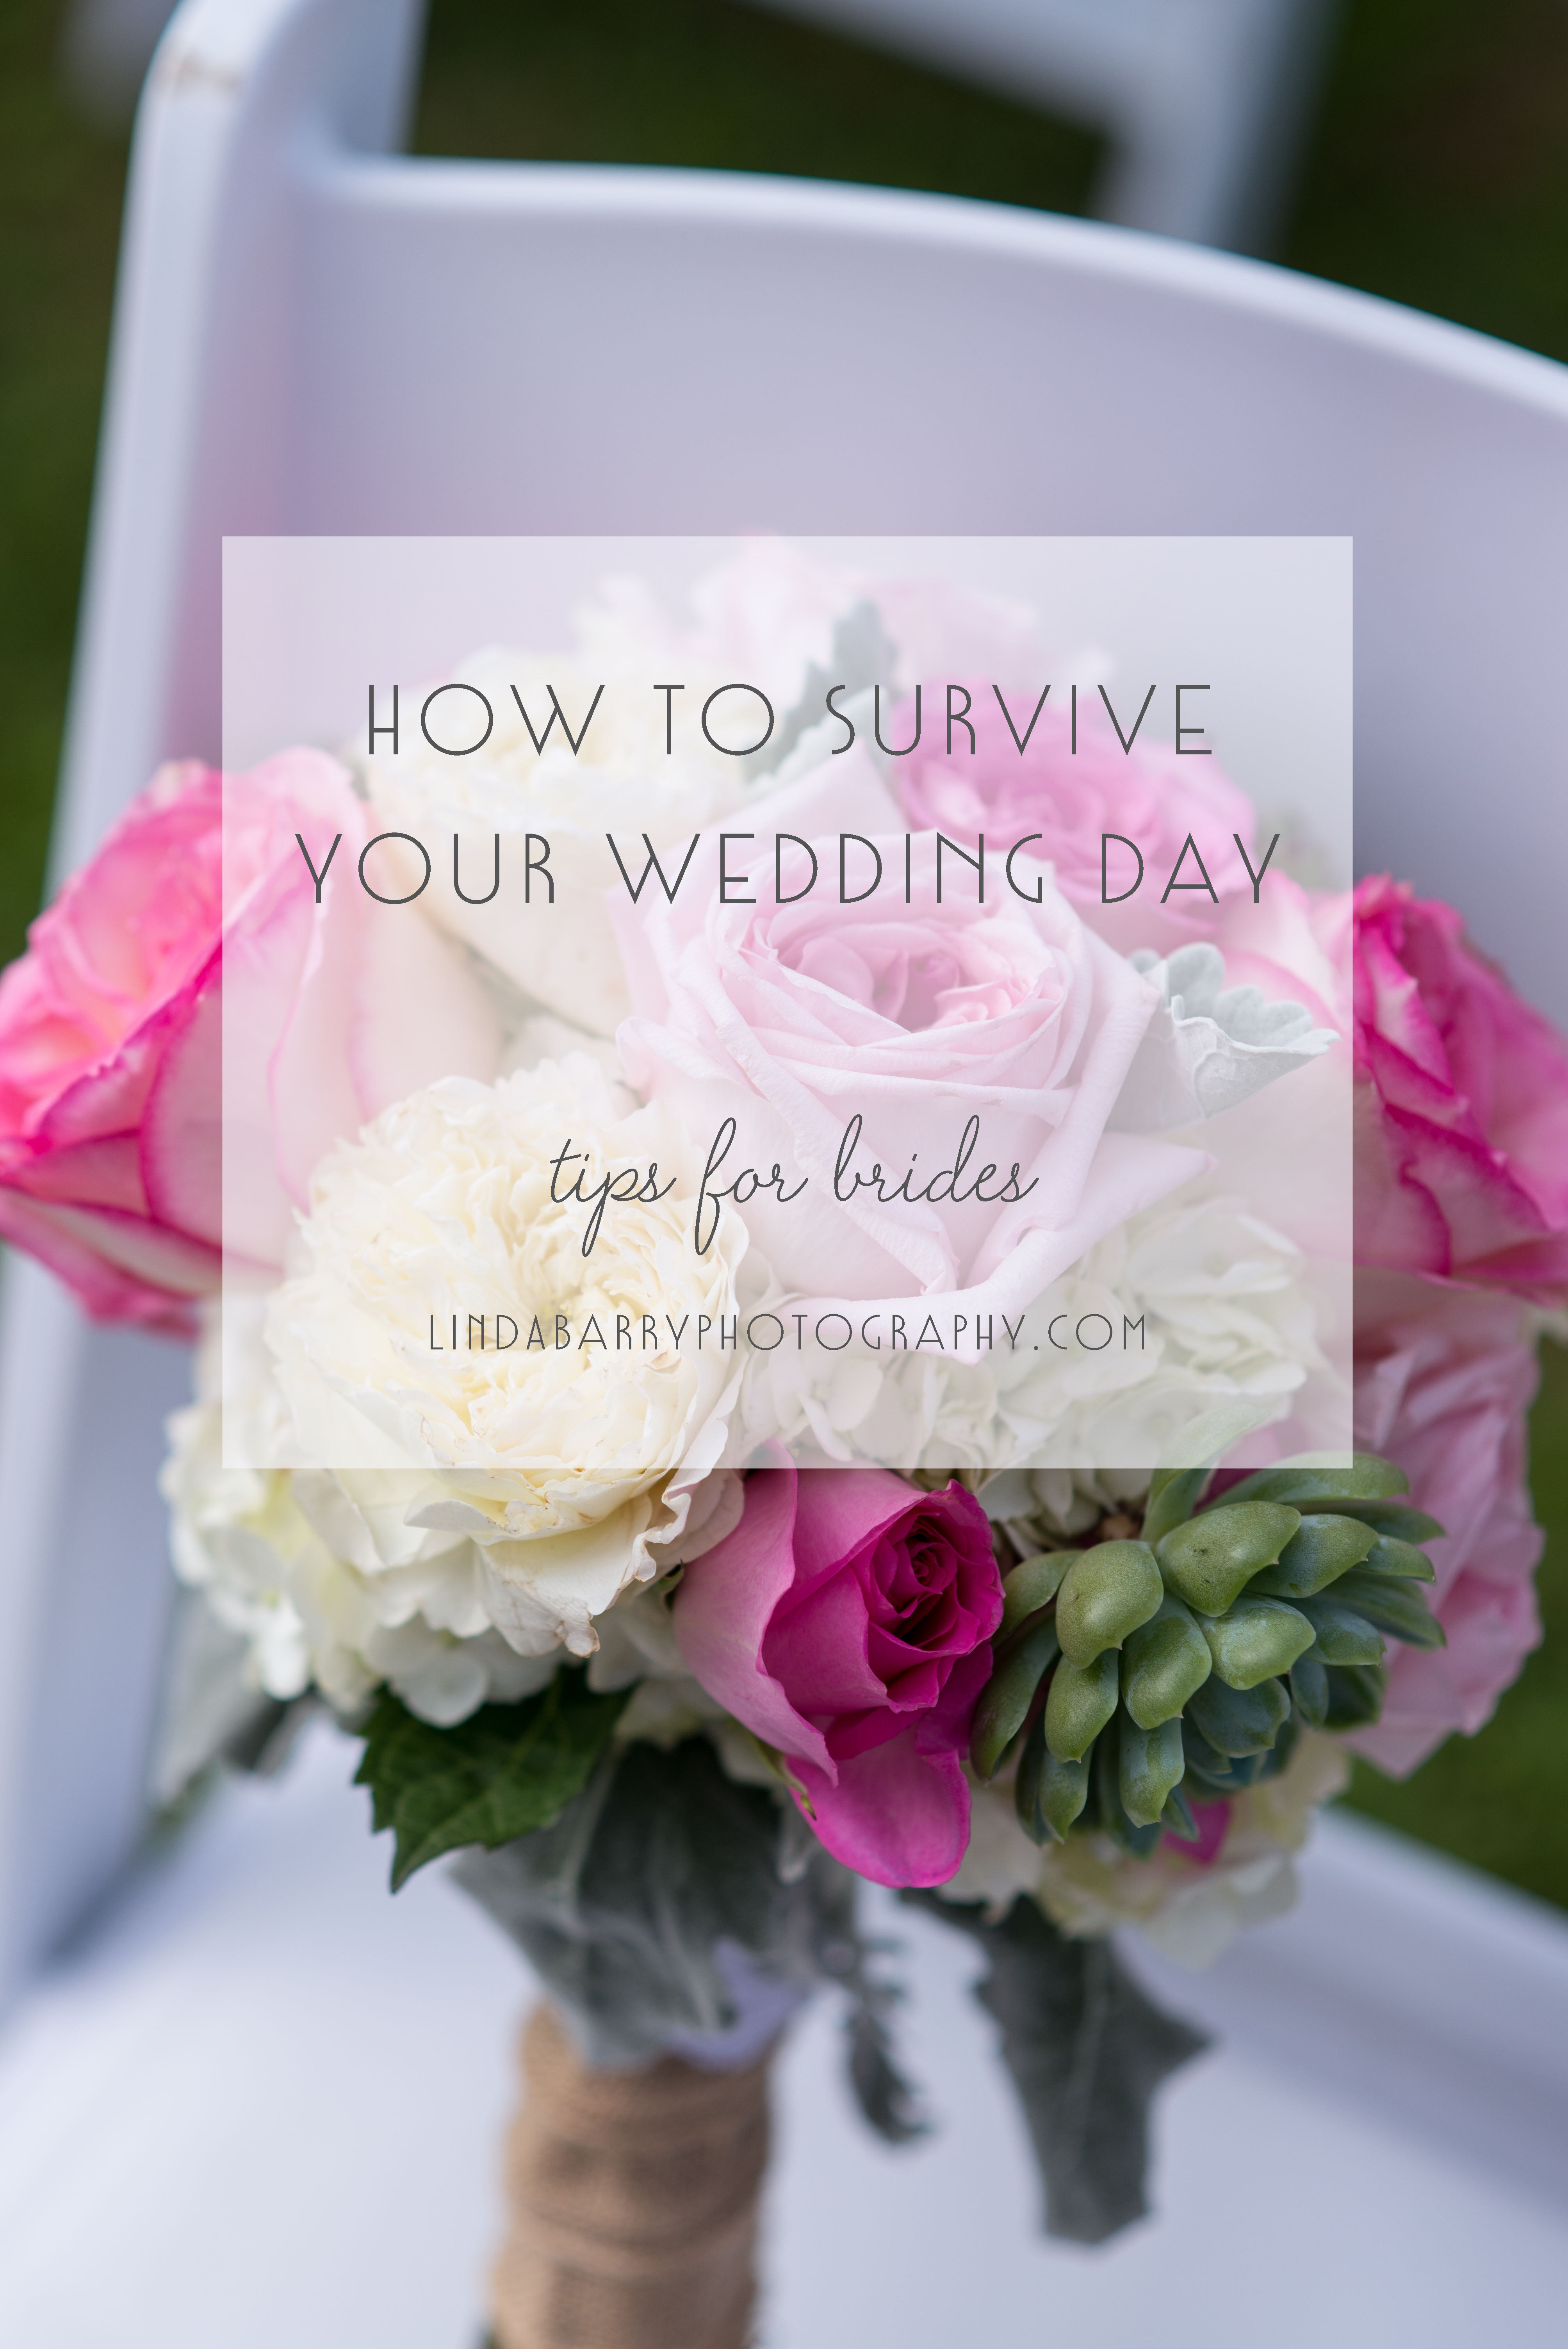 Tips for surviving your wedding day by Linda Barry Photography